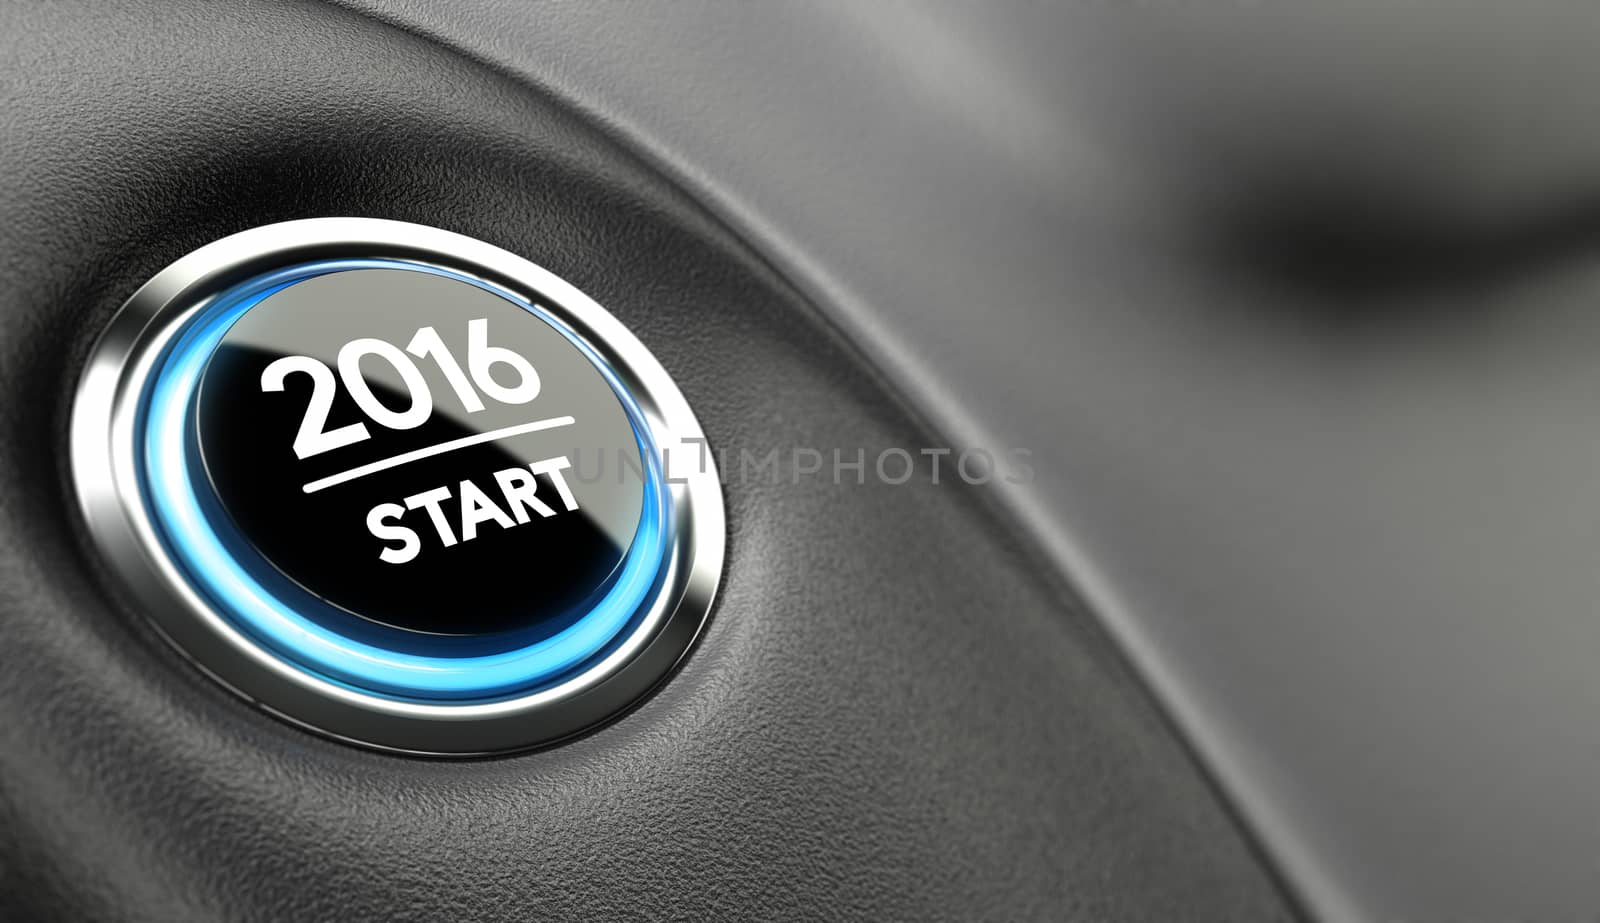 2016 push button. Concept of new year, two thousand sixteen.